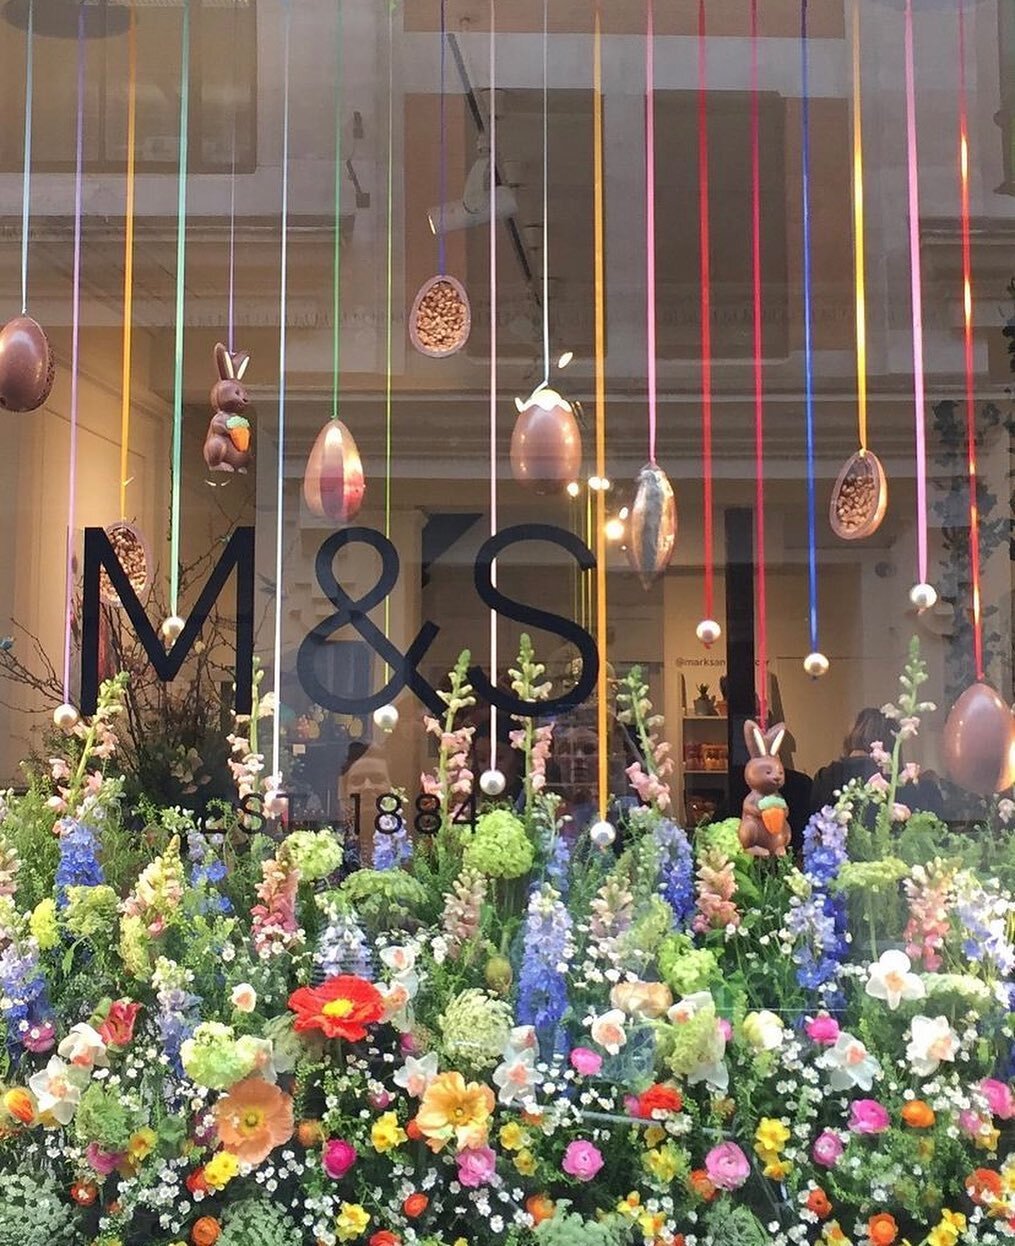 One from the archives and always a fave, Easter with @marksandspencerfood 🐣 #hackneyflorist #clareloveblooms #londonflorist #inspiredbynature #foamfree